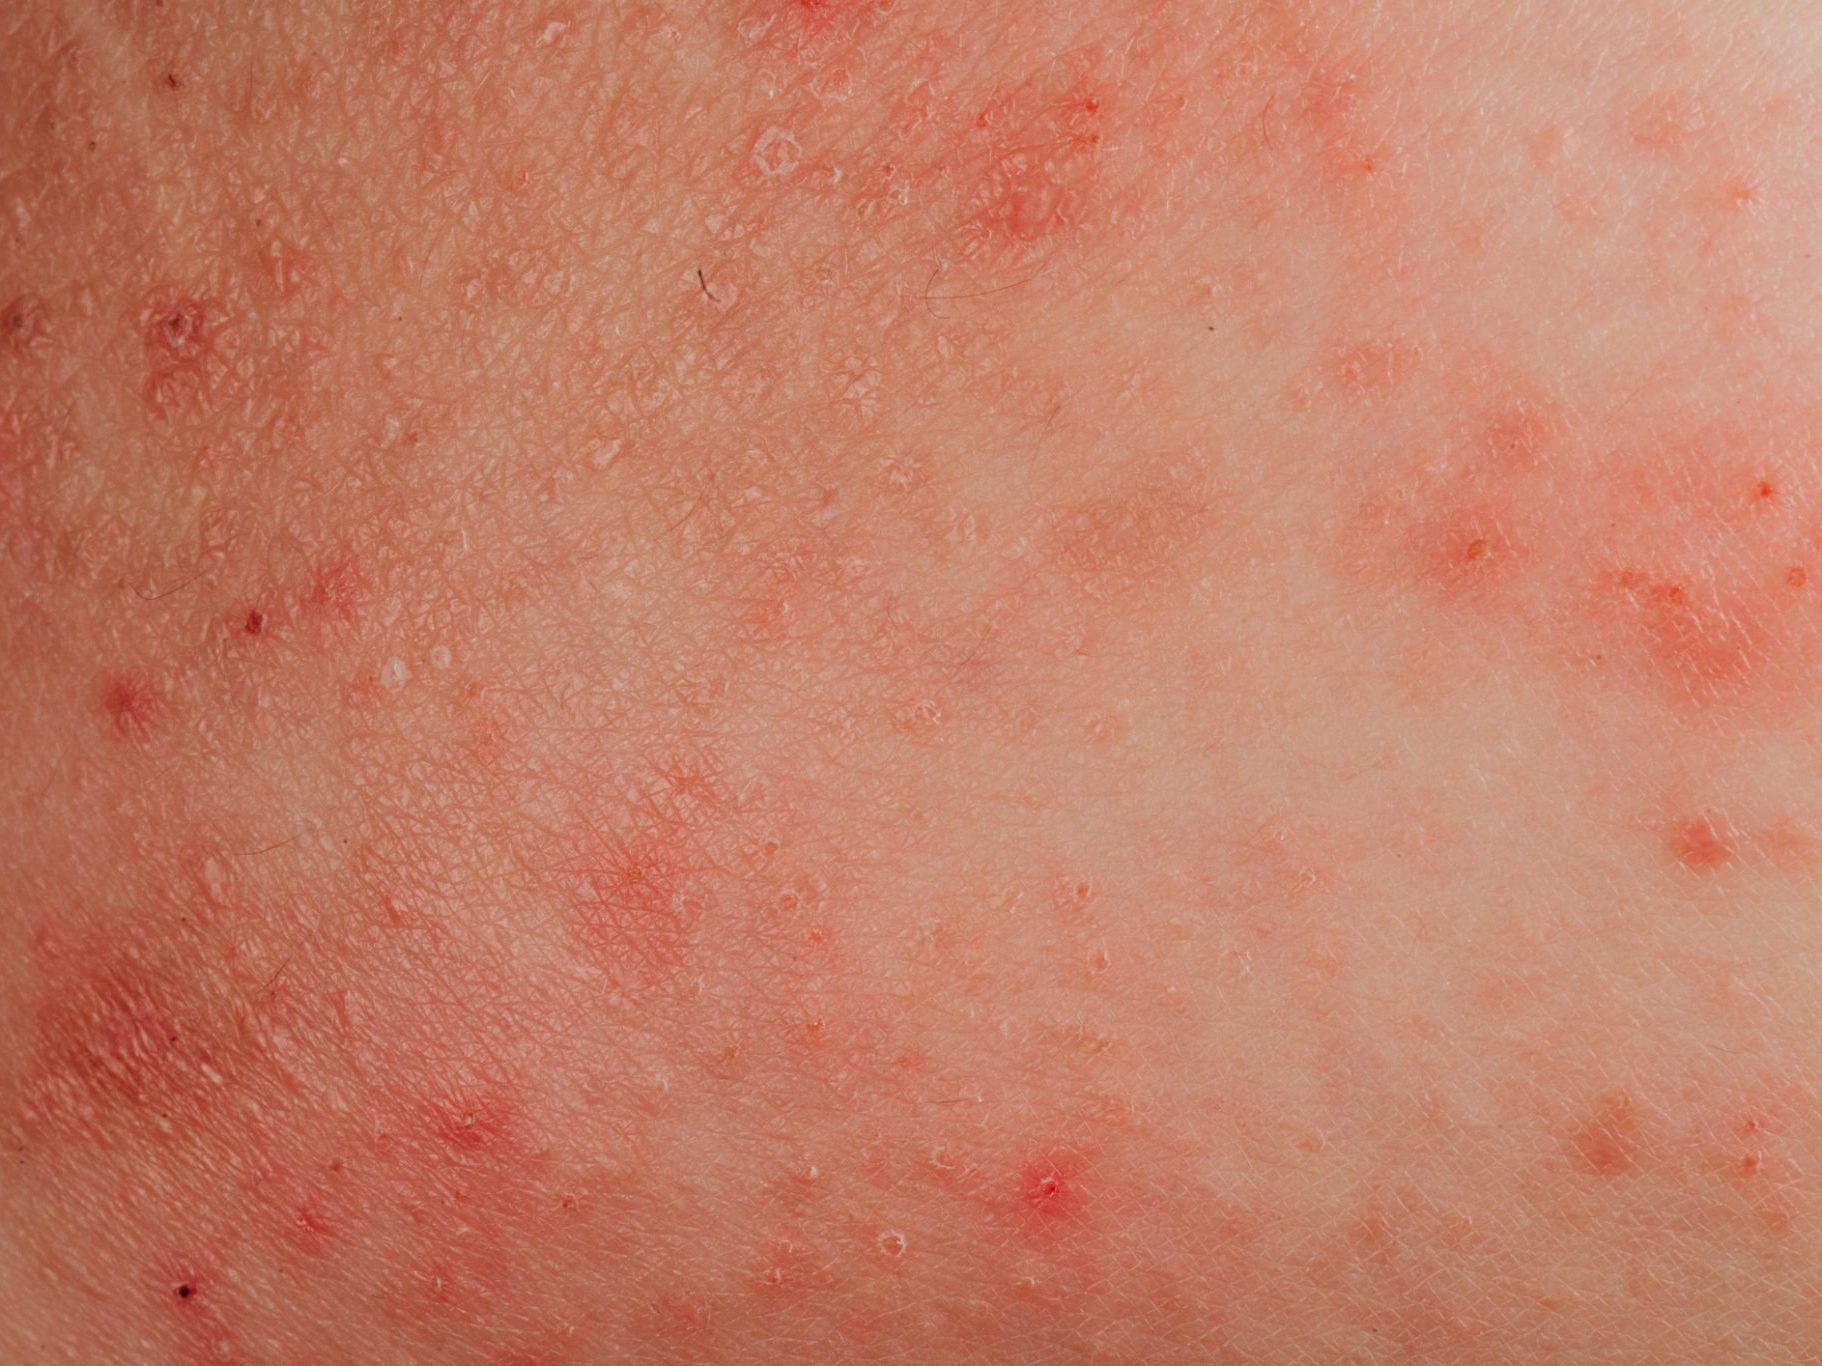 How to Tell the Difference Between Psoriasis, Rosacea, and Eczema - eczema allergy on skin